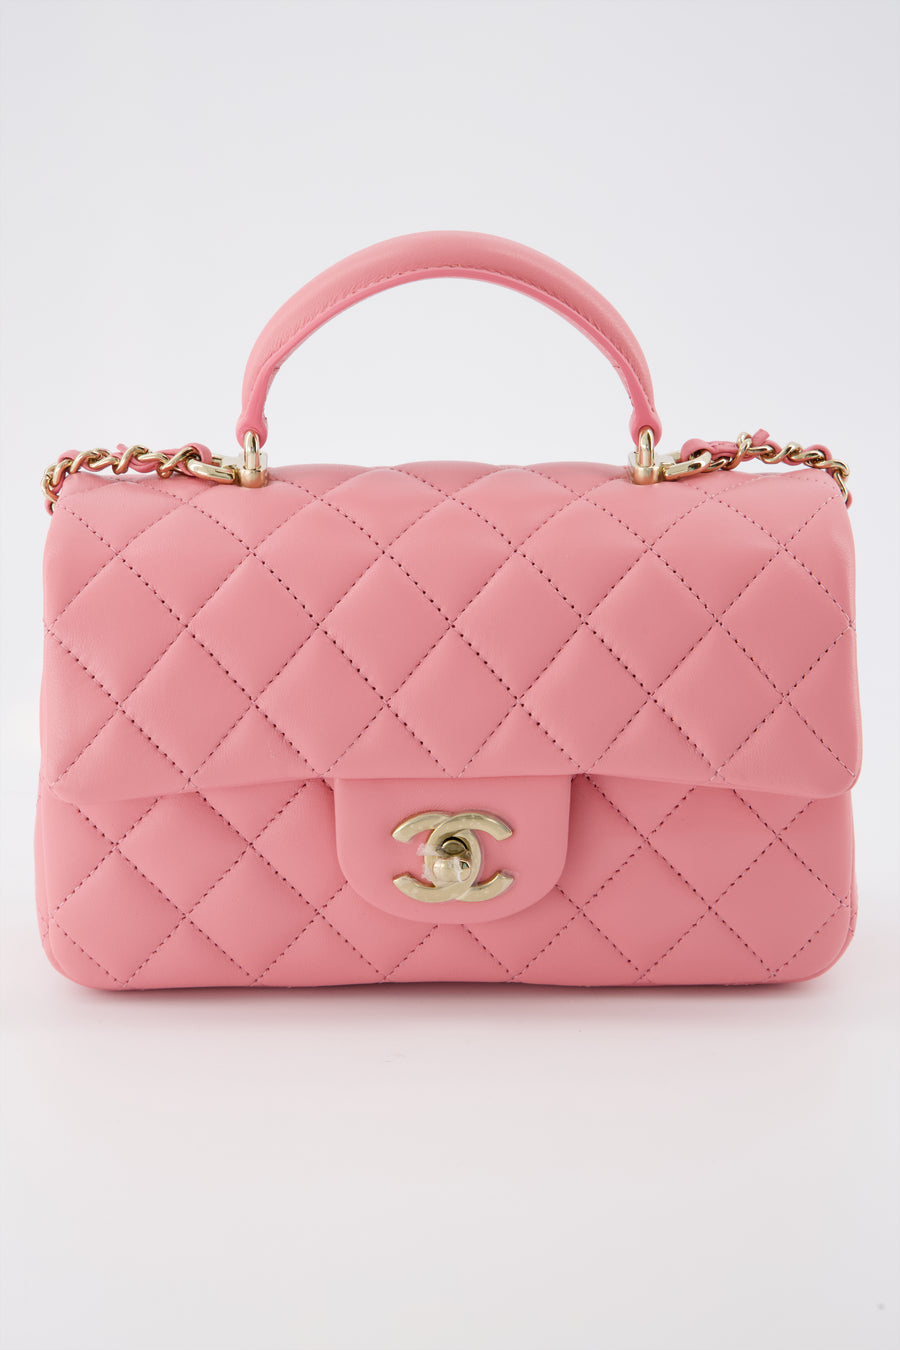 Chanel Caviar Quilted Sweetheart Flap Pink